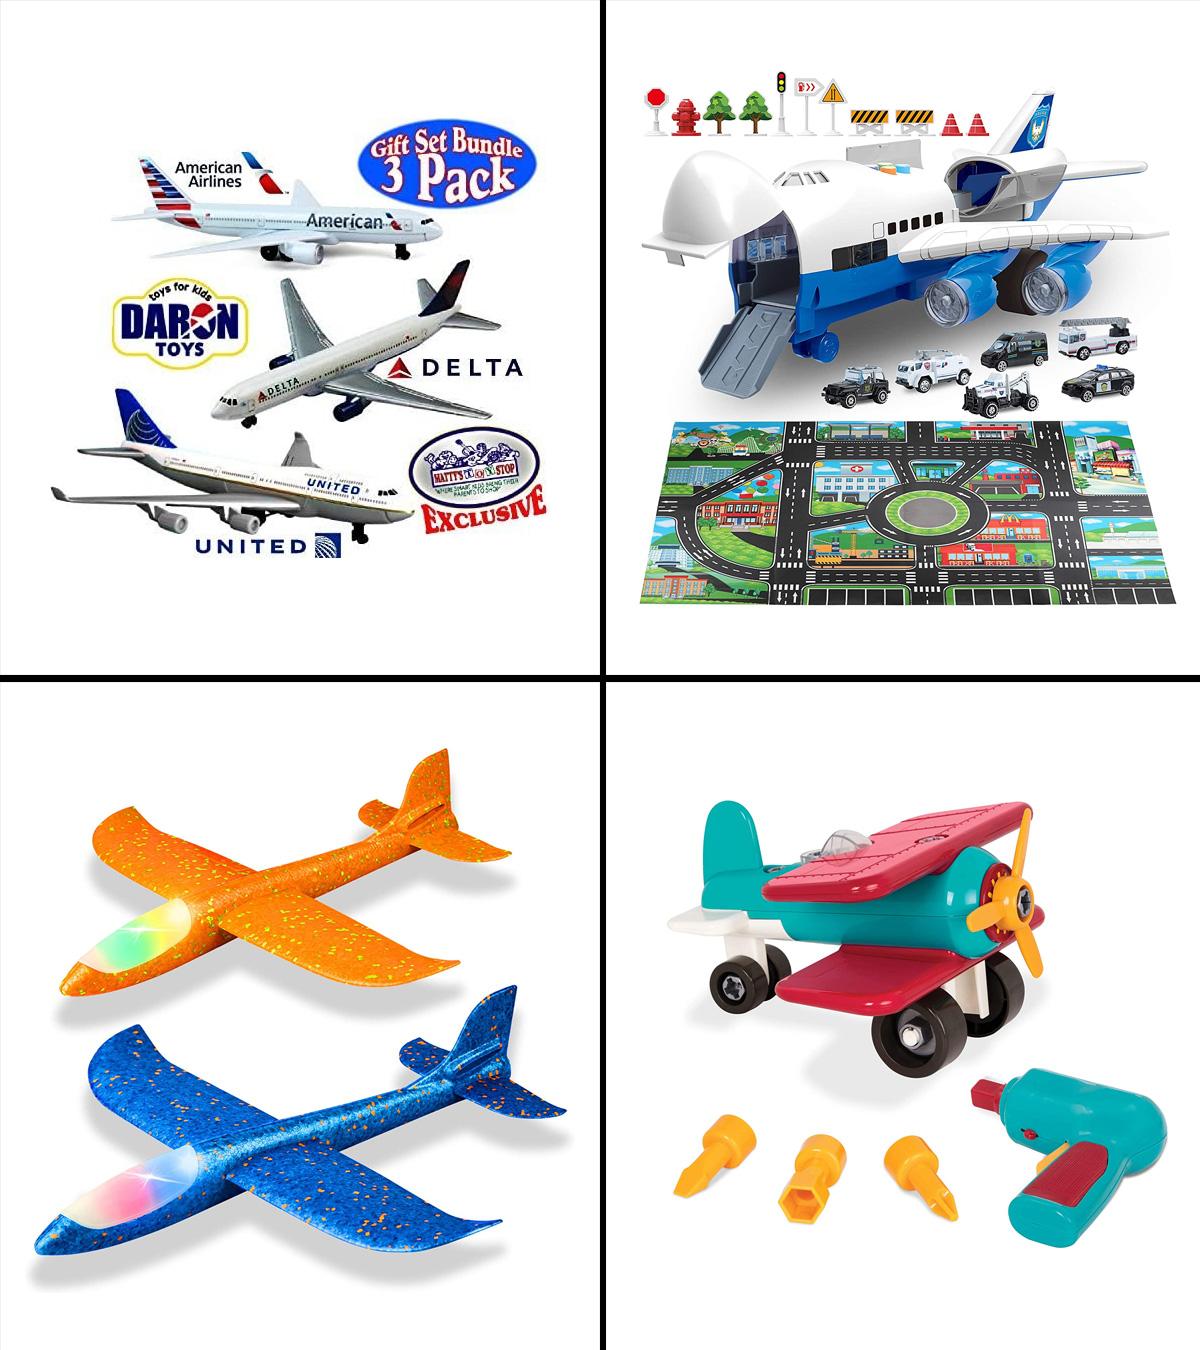 Remote Aeroplane Toy: Comparing the Exciting Features of Remote Aeroplane Toys